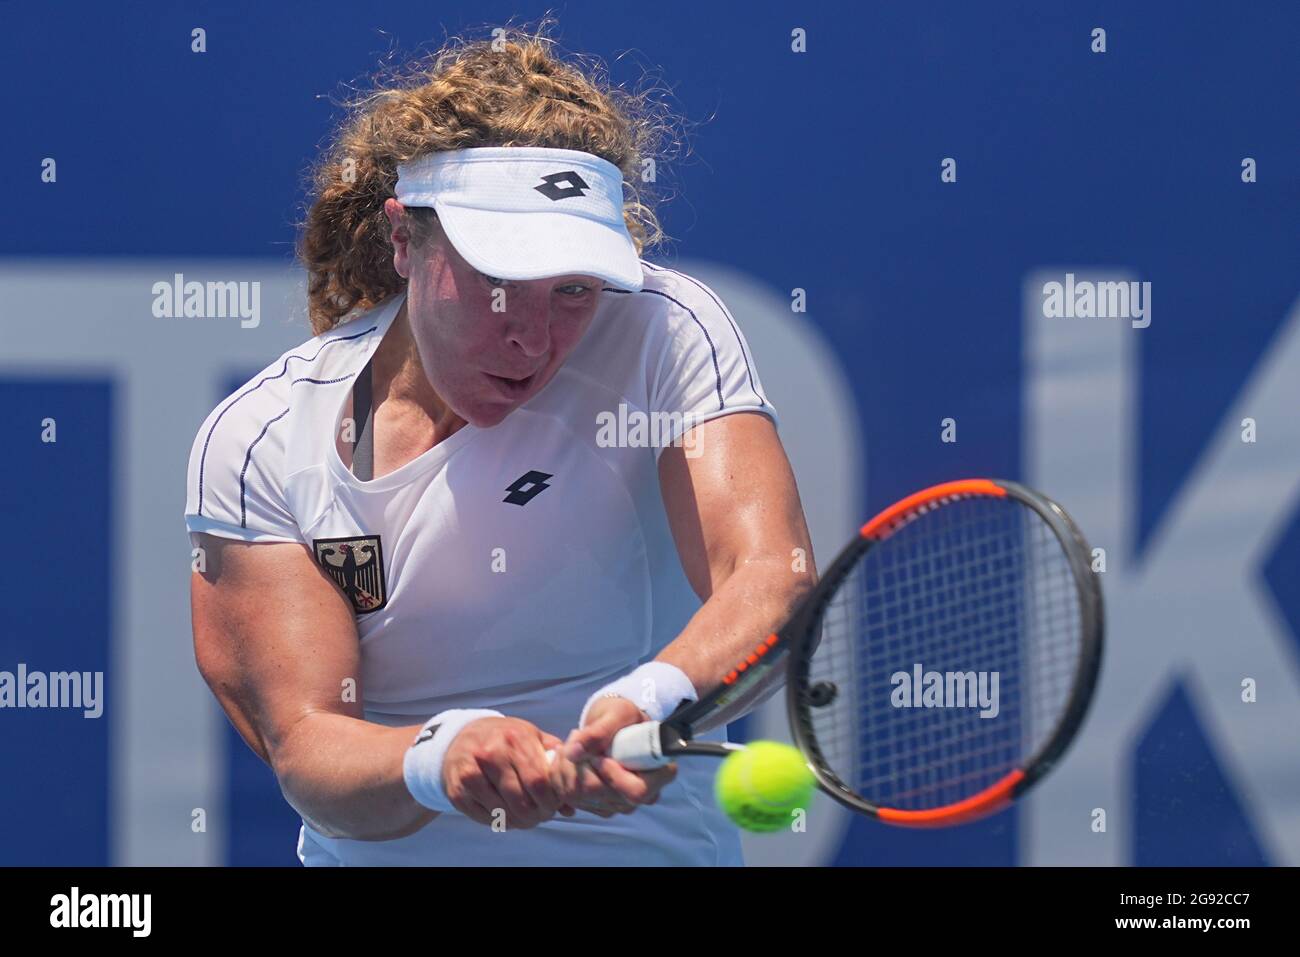 Tokyo, Japan. 24th July, 2021. Tennis: Olympics, Women's singles, 1st round, Friedsam (Germany) - Watson (Great Britain) at Ariake Tennis Park. Anna-Lena Friedsam from Germany in action. Credit: Michael Kappeler/dpa/Alamy Live News Stock Photo